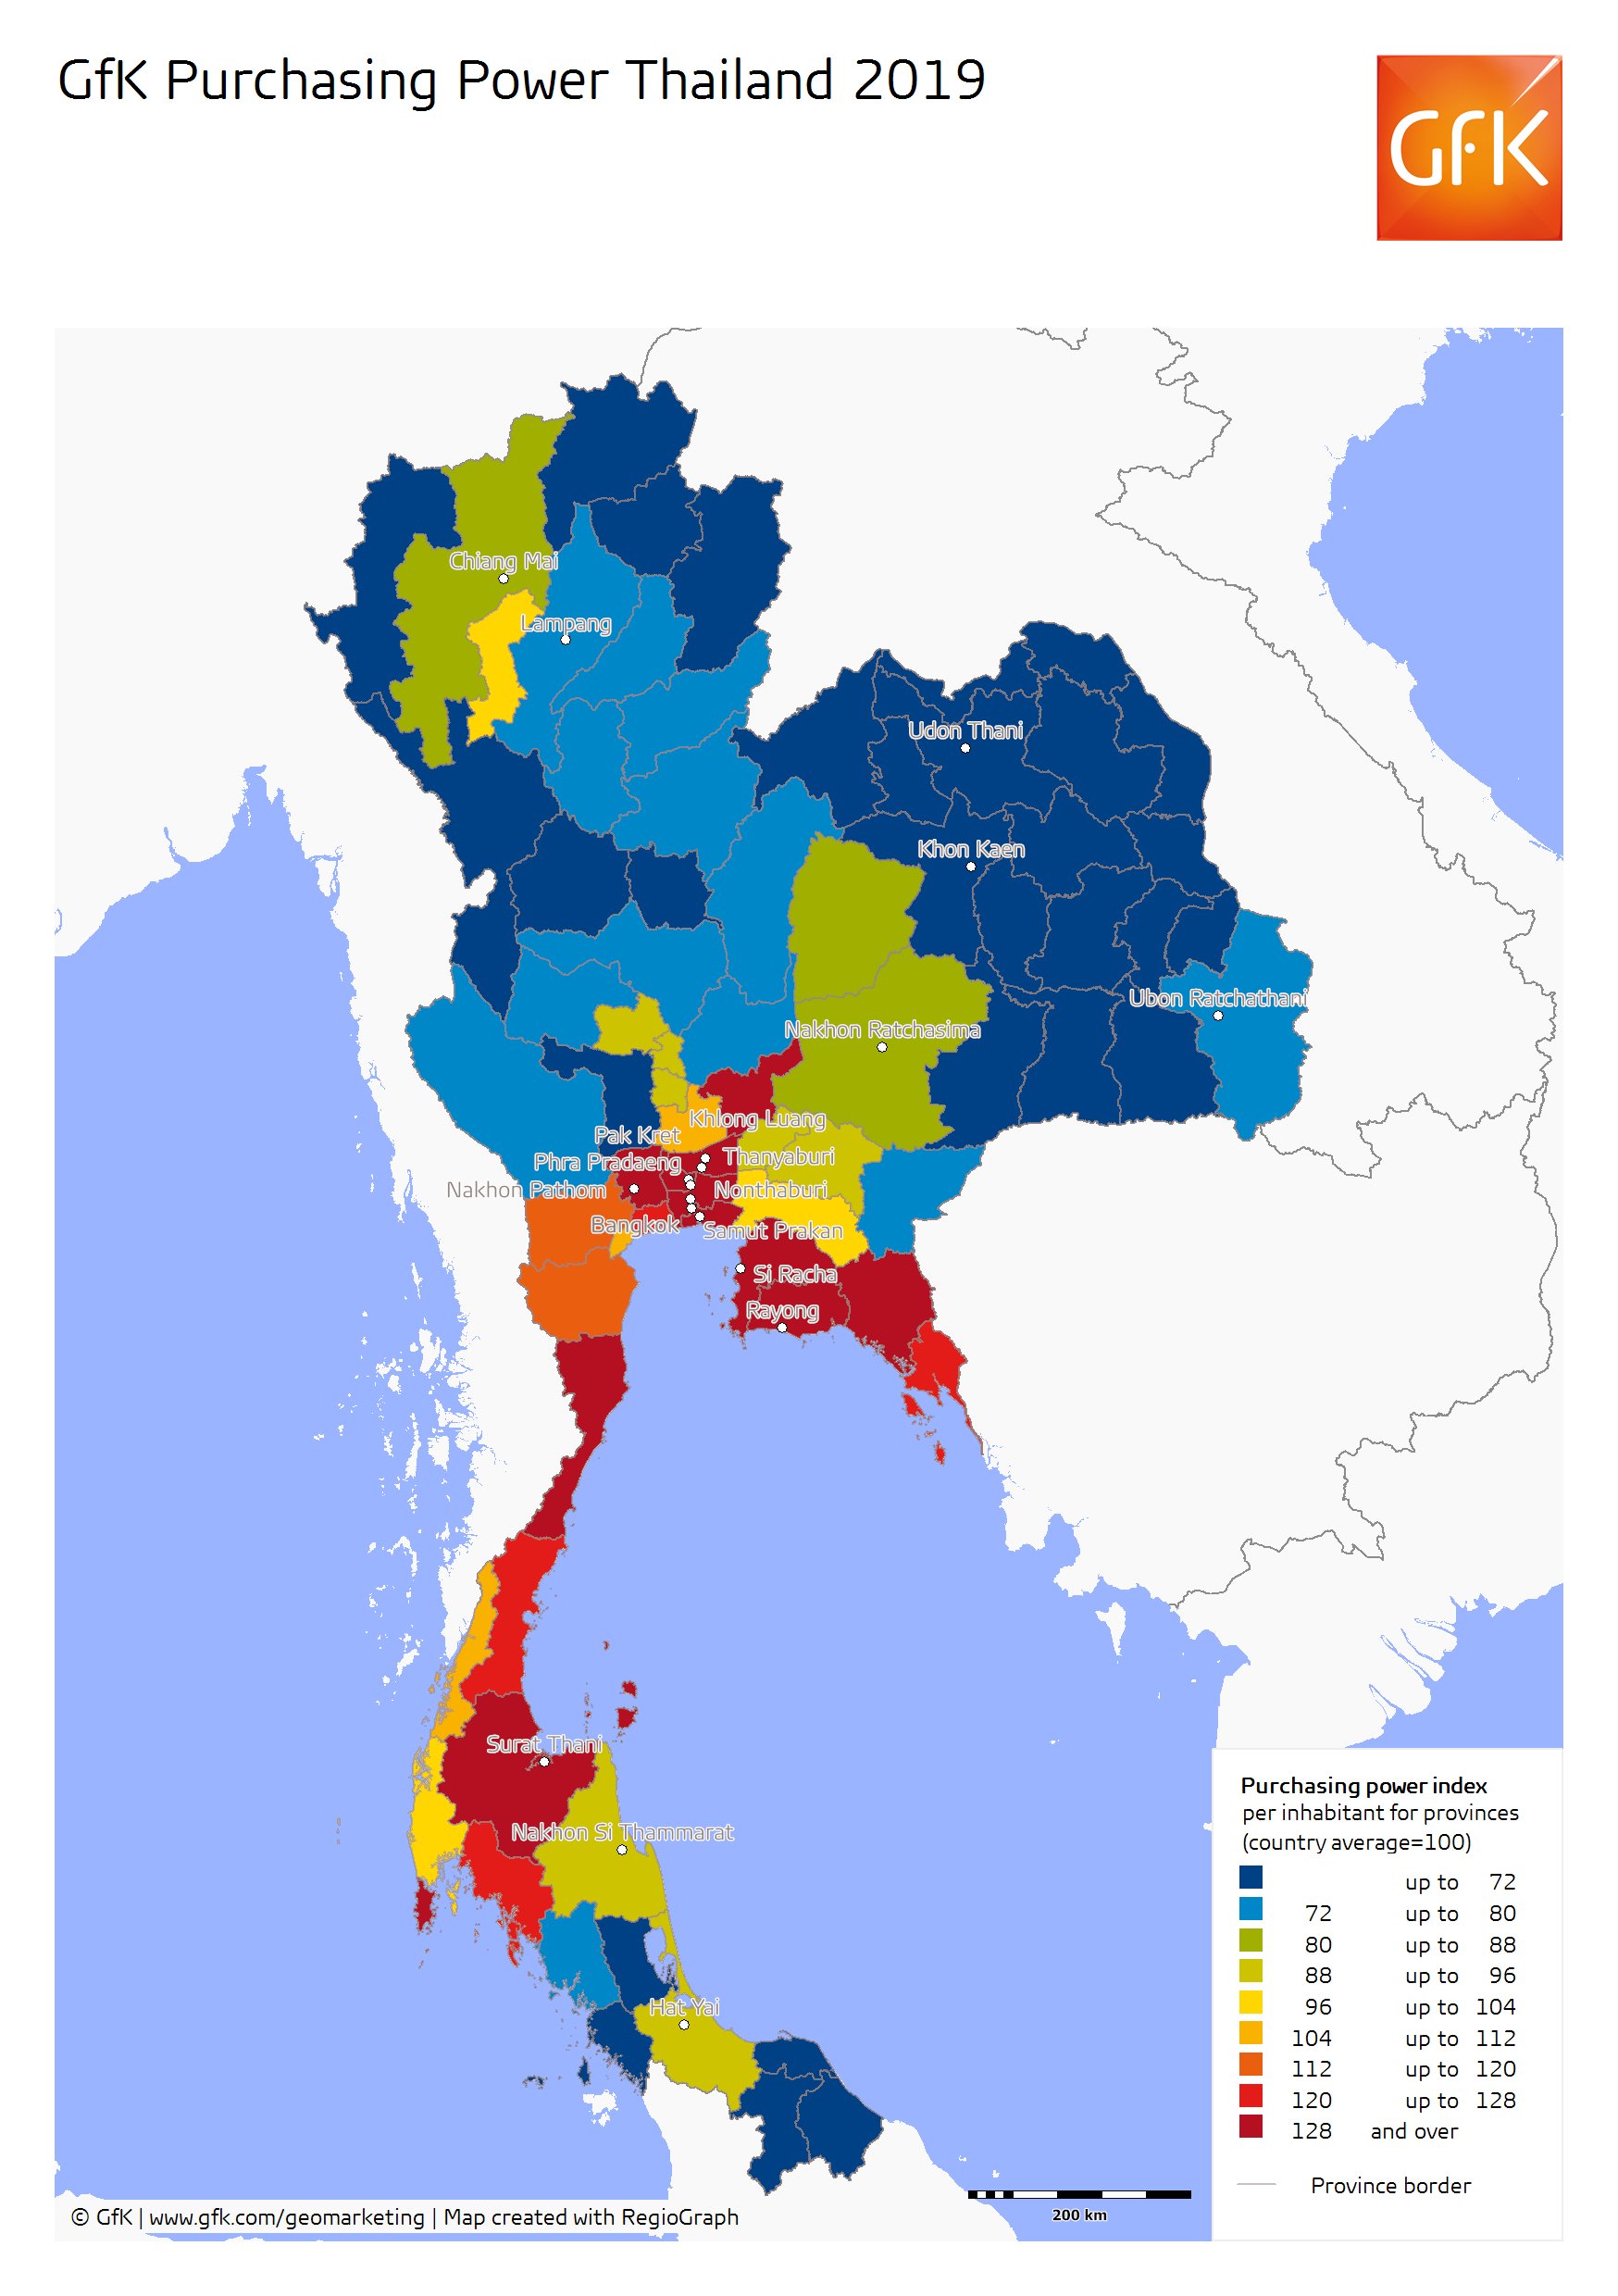 Gfk En Twitter Mapmonday Where Is Per Capita Purchasing Power Highest In Thailand Among The Nation S 77 Provinces The Top Spots Go To Bangkok Nakhon Ratchasima And Chiang Mai Check Out Our